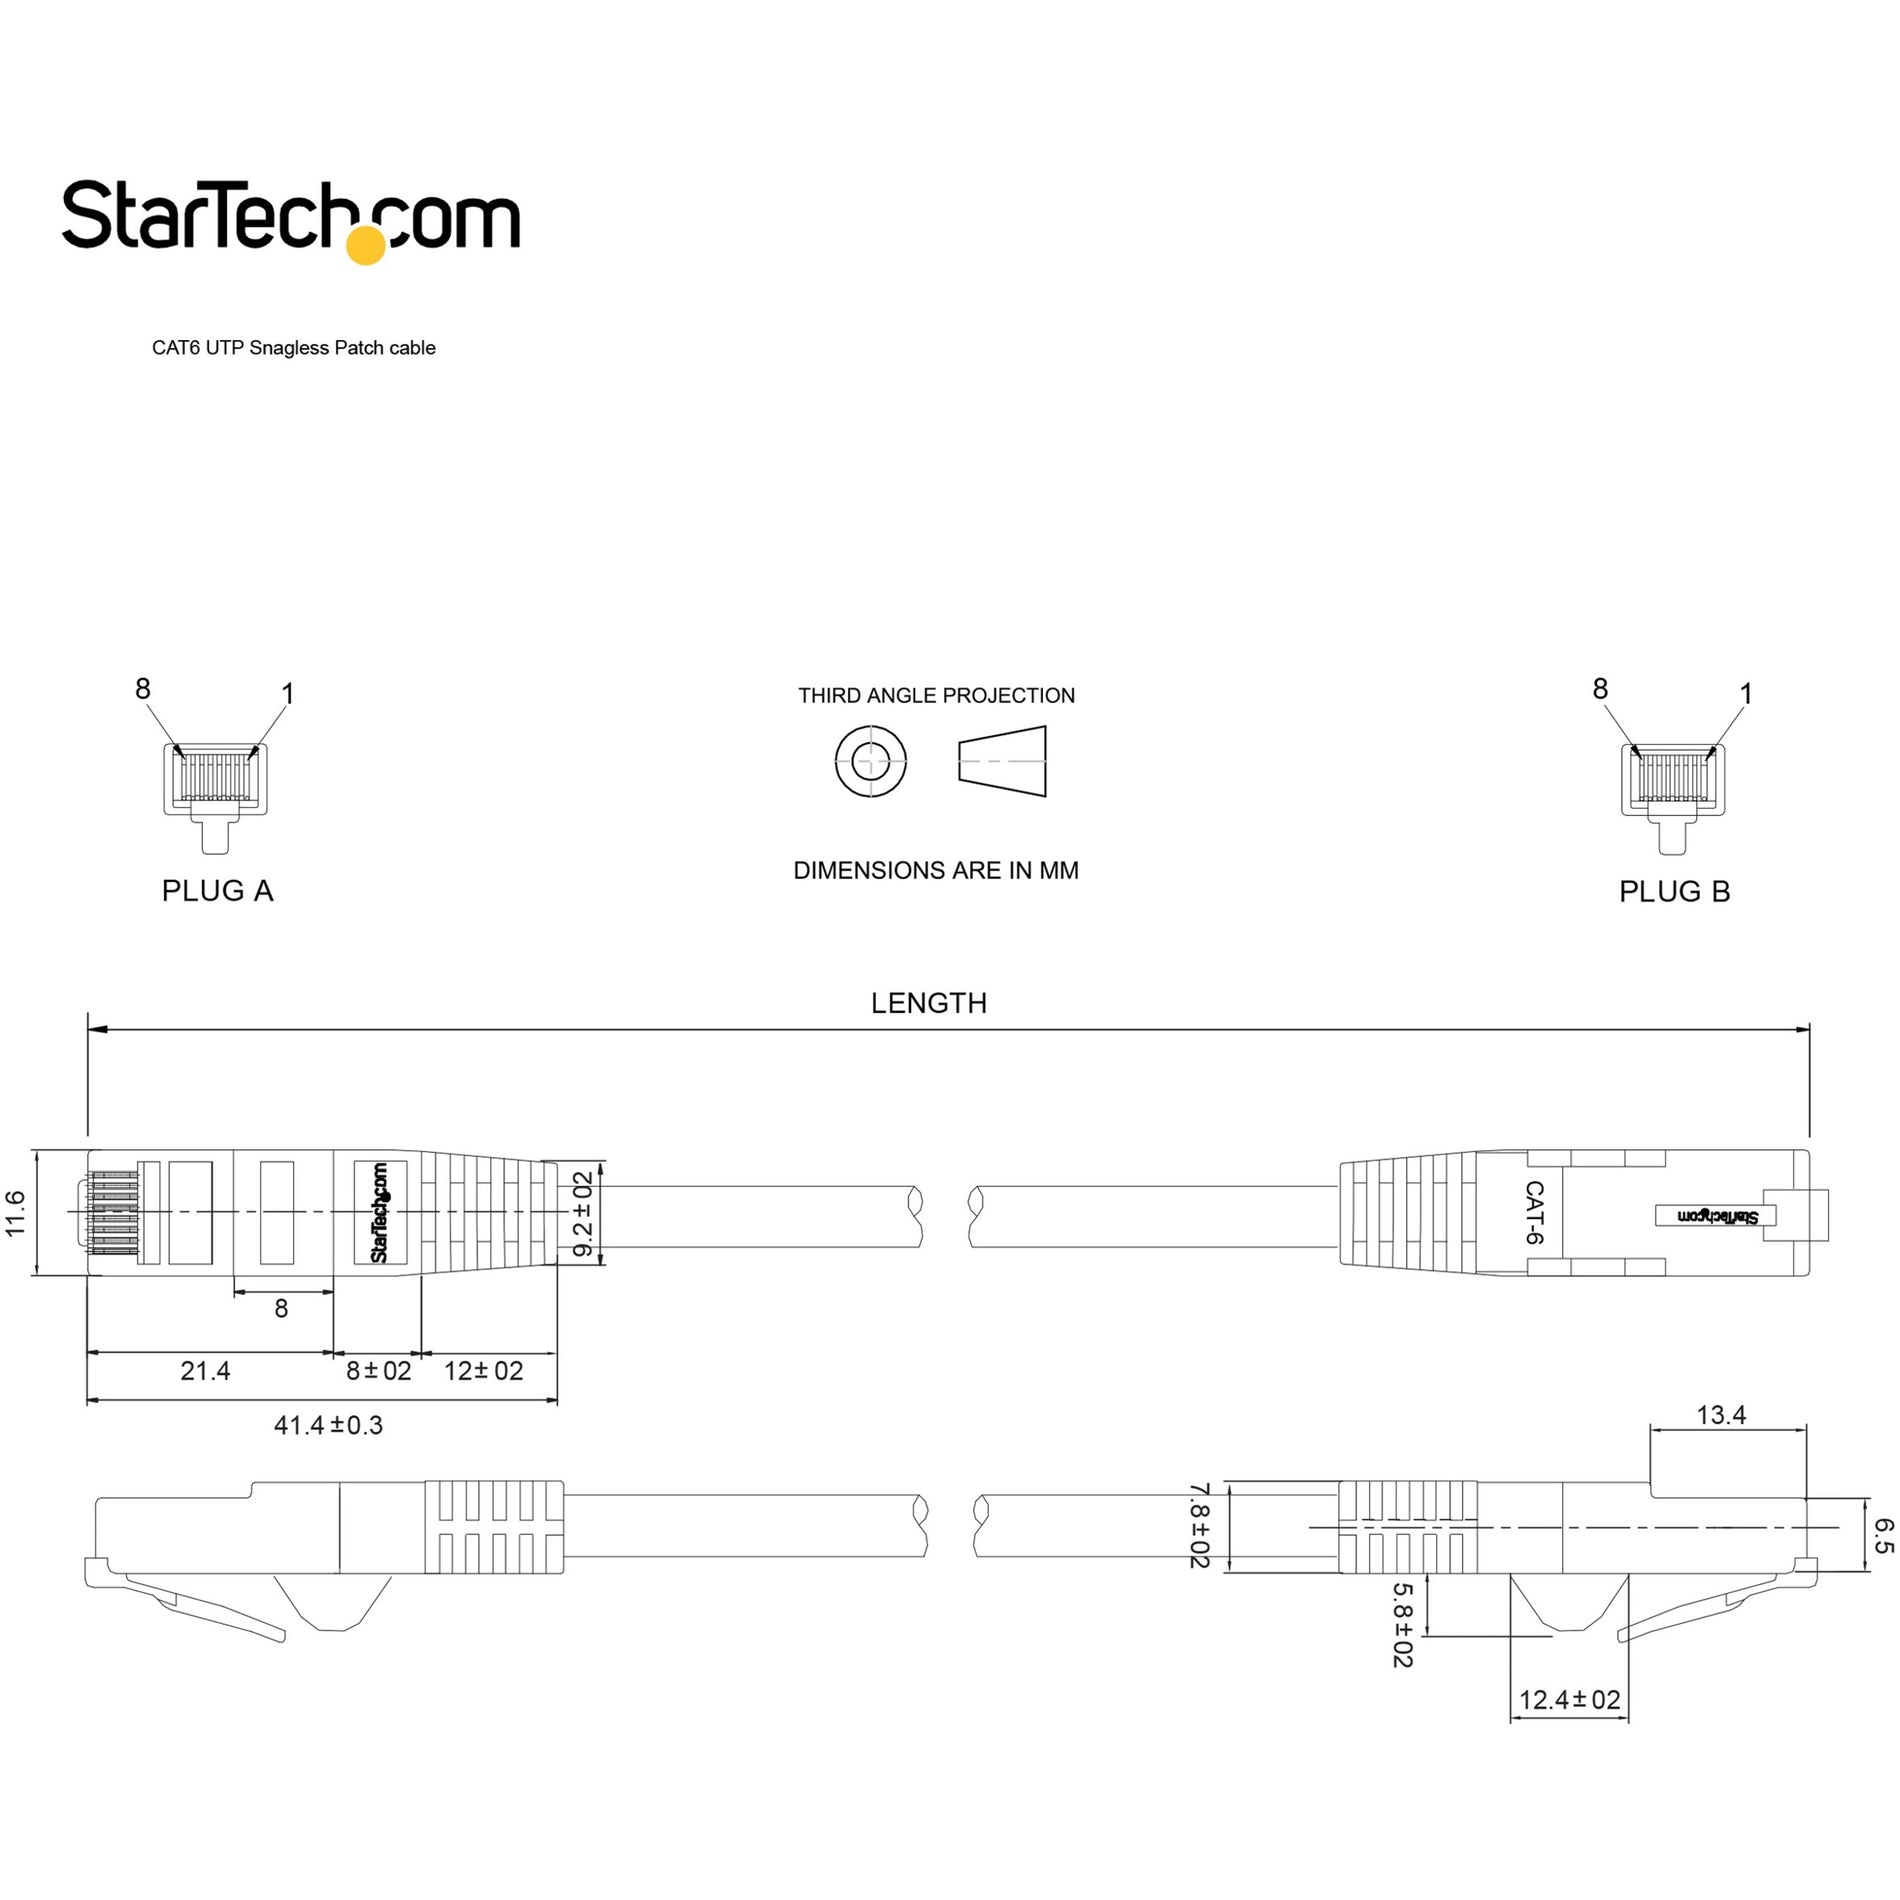 StarTech.com N6PATCH3GR 3 ft Gray Snagless Cat6 UTP Patch Cable, Lifetime Warranty, 10 Gbit/s Data Transfer Rate, Gold Plated Connectors